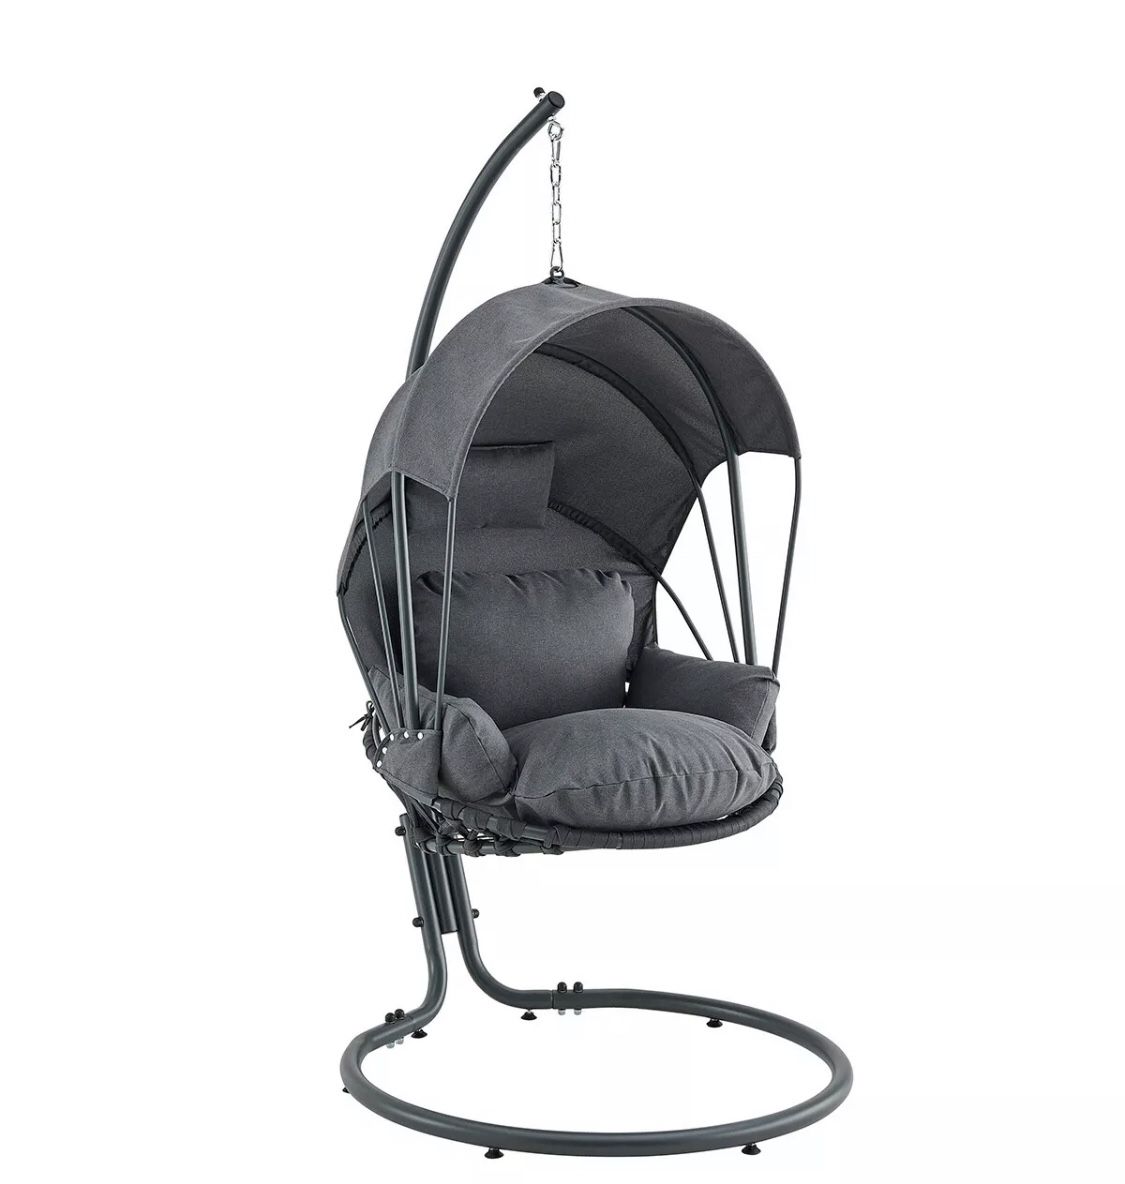 ❤️ BRAND NEW XL HANGING CHAIR SWING LOUNGE DEEP SEAT CANOPY WITH STAND GREY